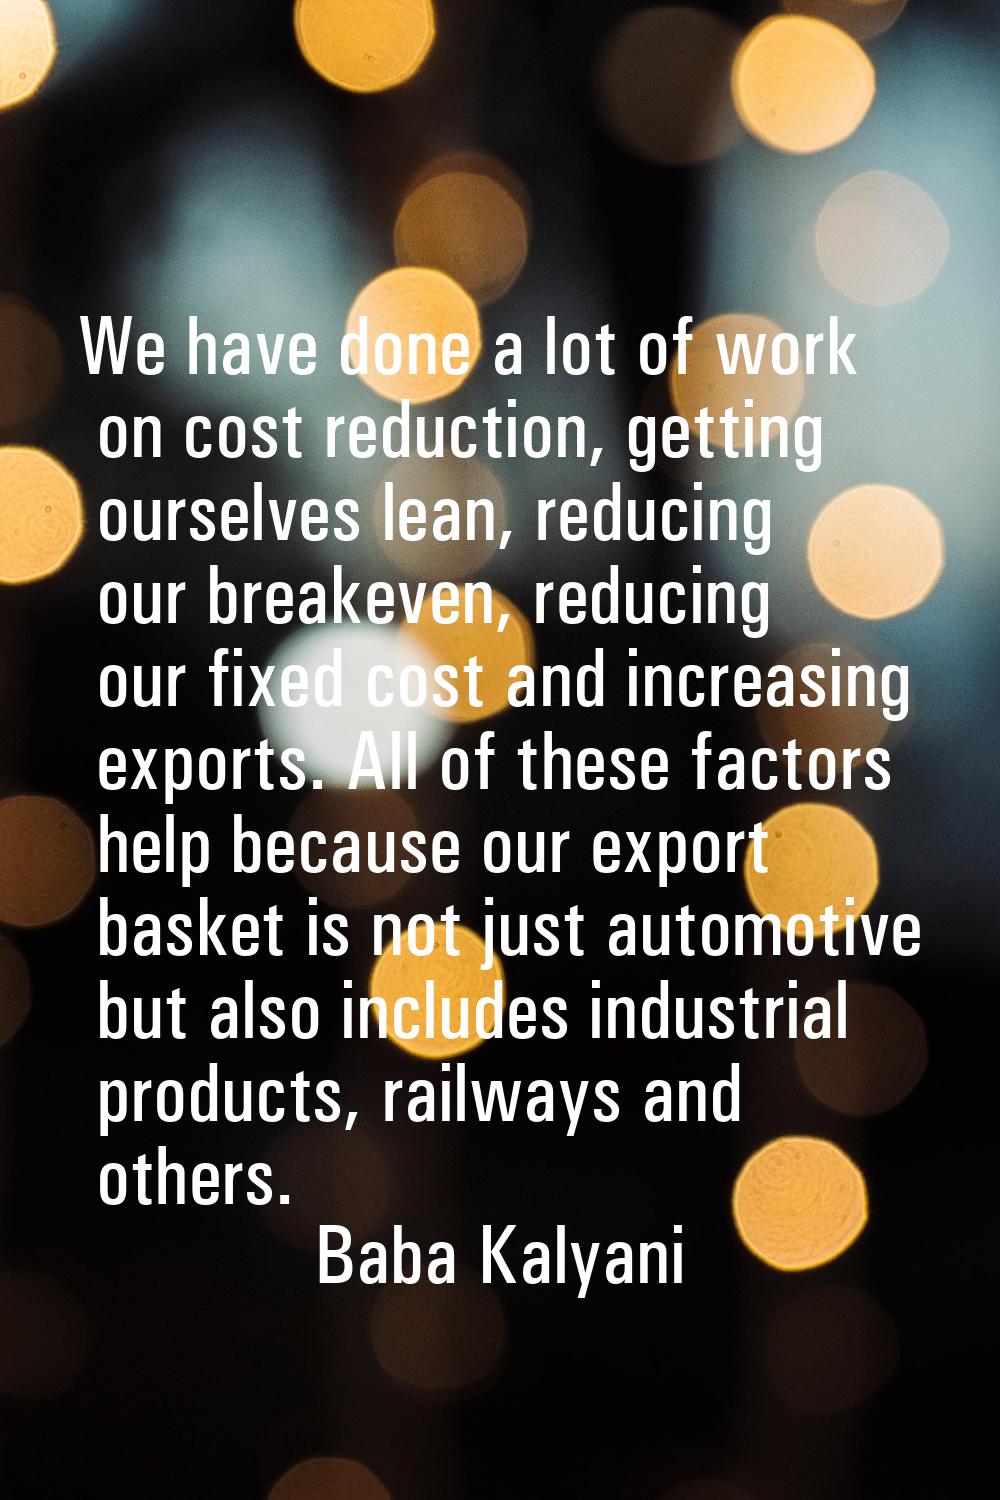 We have done a lot of work on cost reduction, getting ourselves lean, reducing our breakeven, reduc